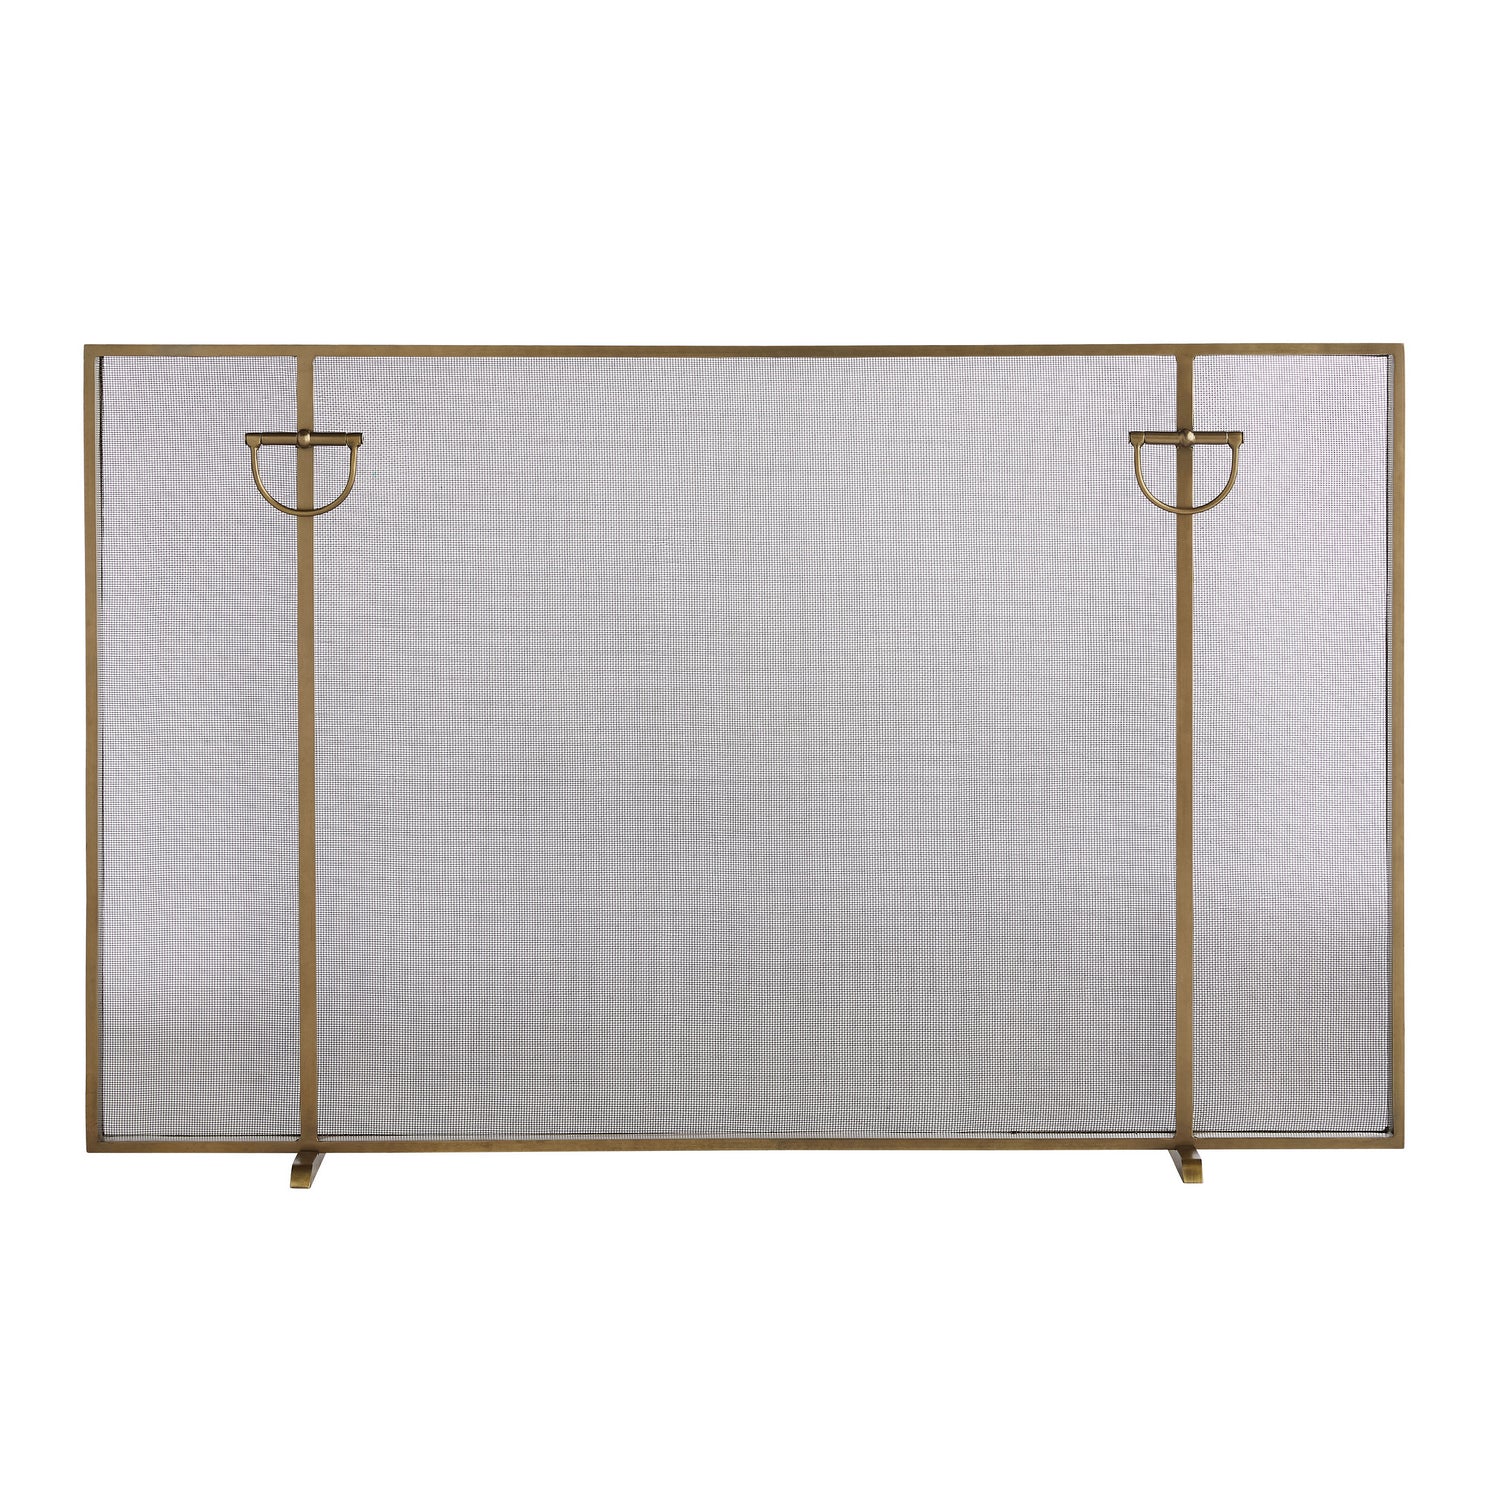 Screen from the Brooklyn collection in Antique Brass finish